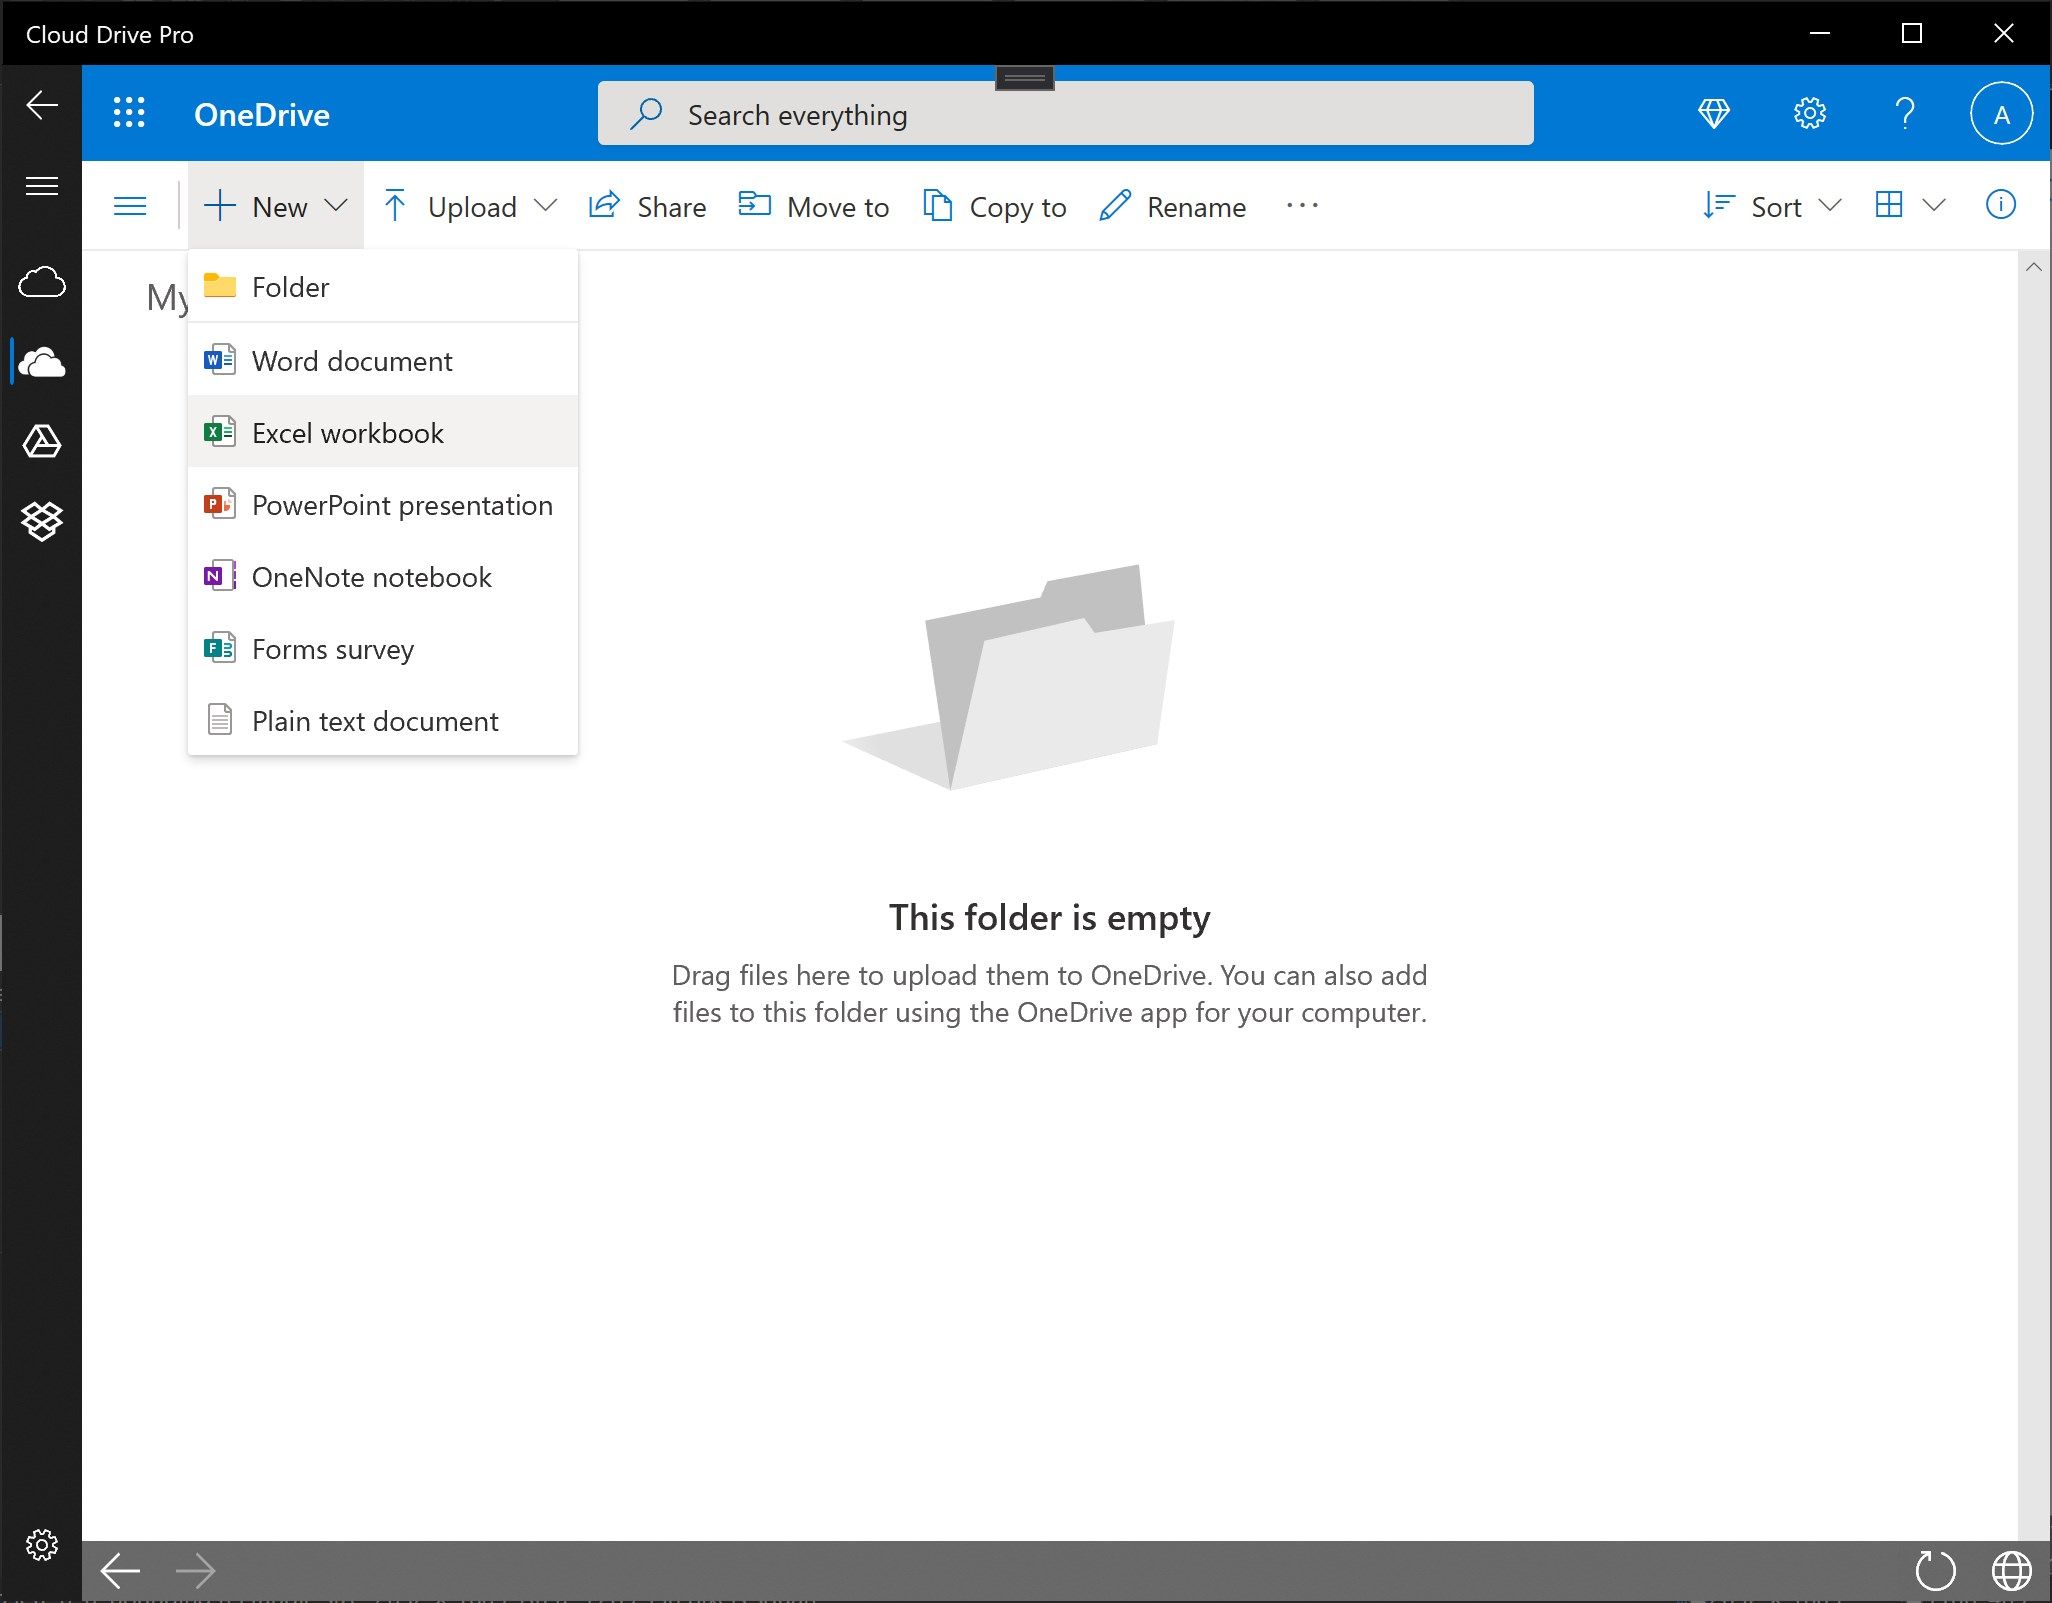 Cloud Drive Pro - OneDrive create Word, Excel, PowerPoint, OneNote documents and edit it